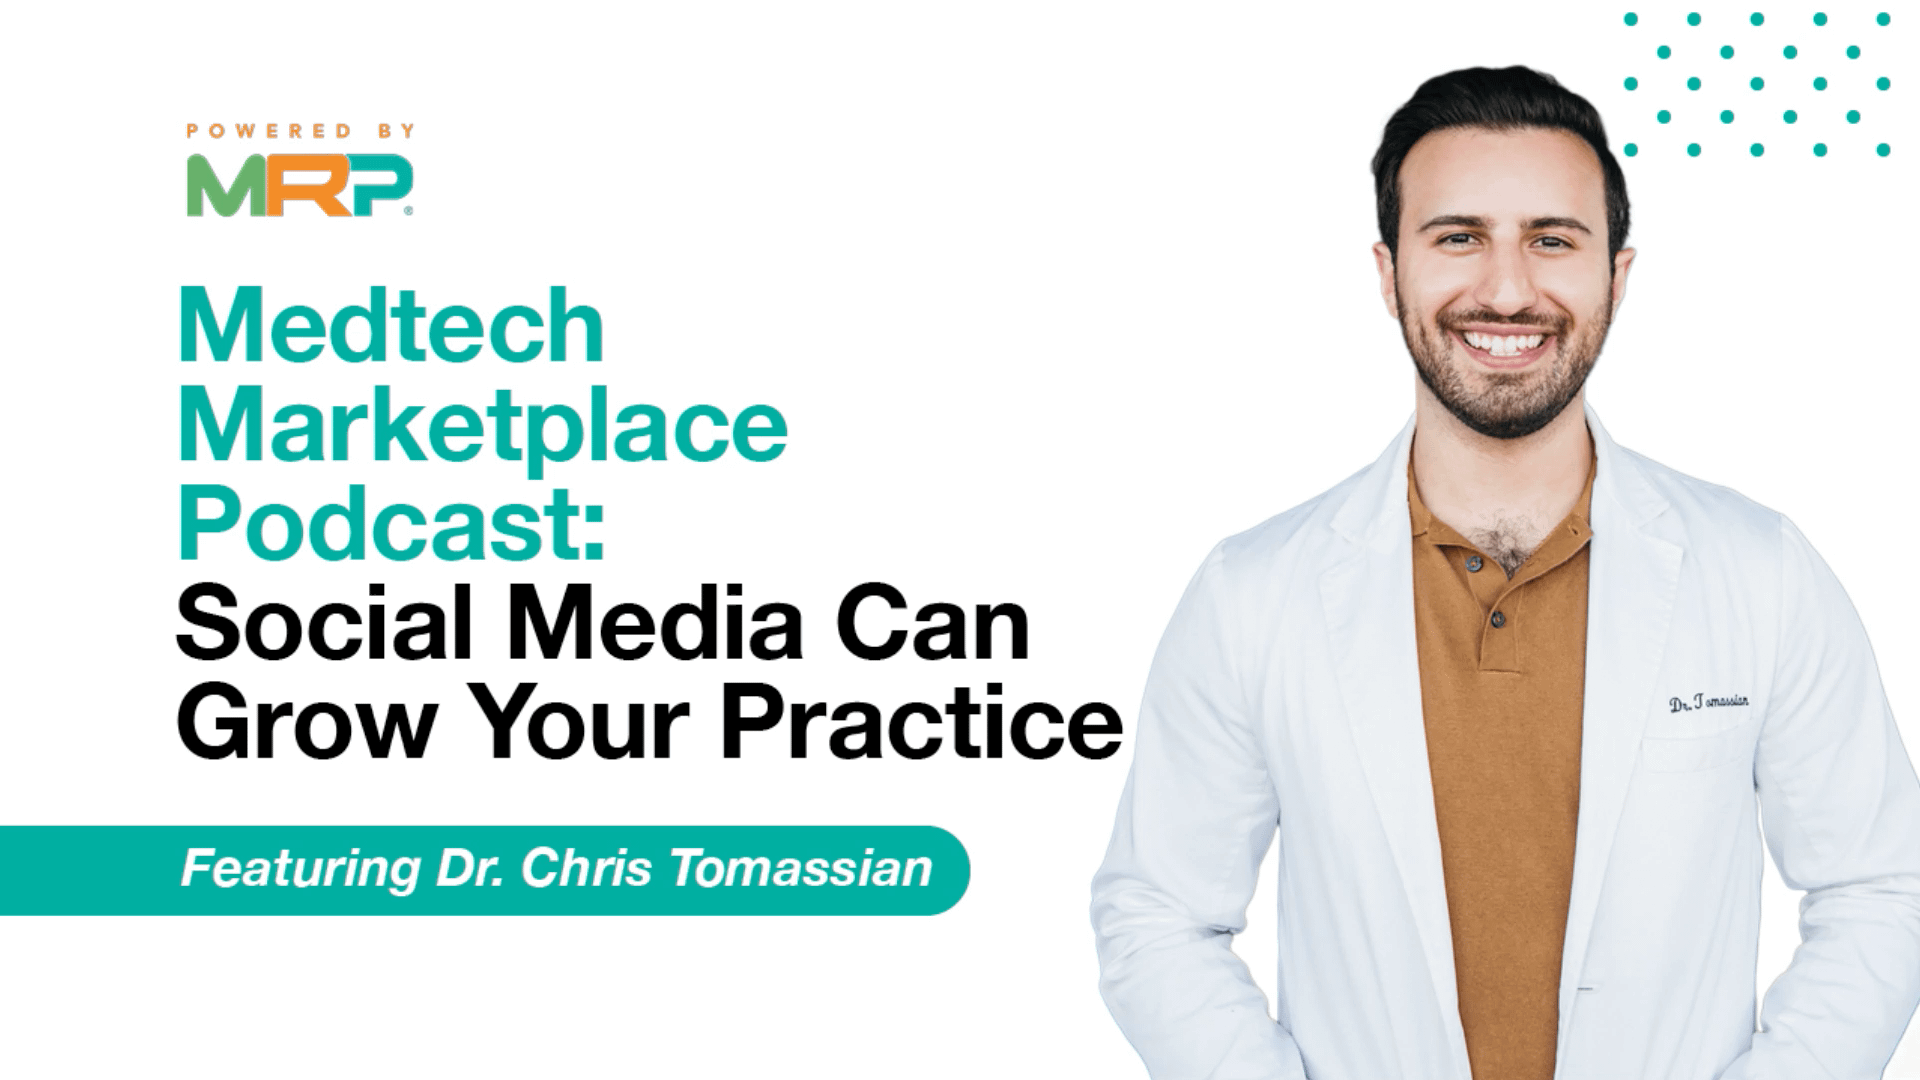 Medtech Marketplace Podcast: Social Media Can Grow Your Practice Featuring Dr. Chris Tomassian 